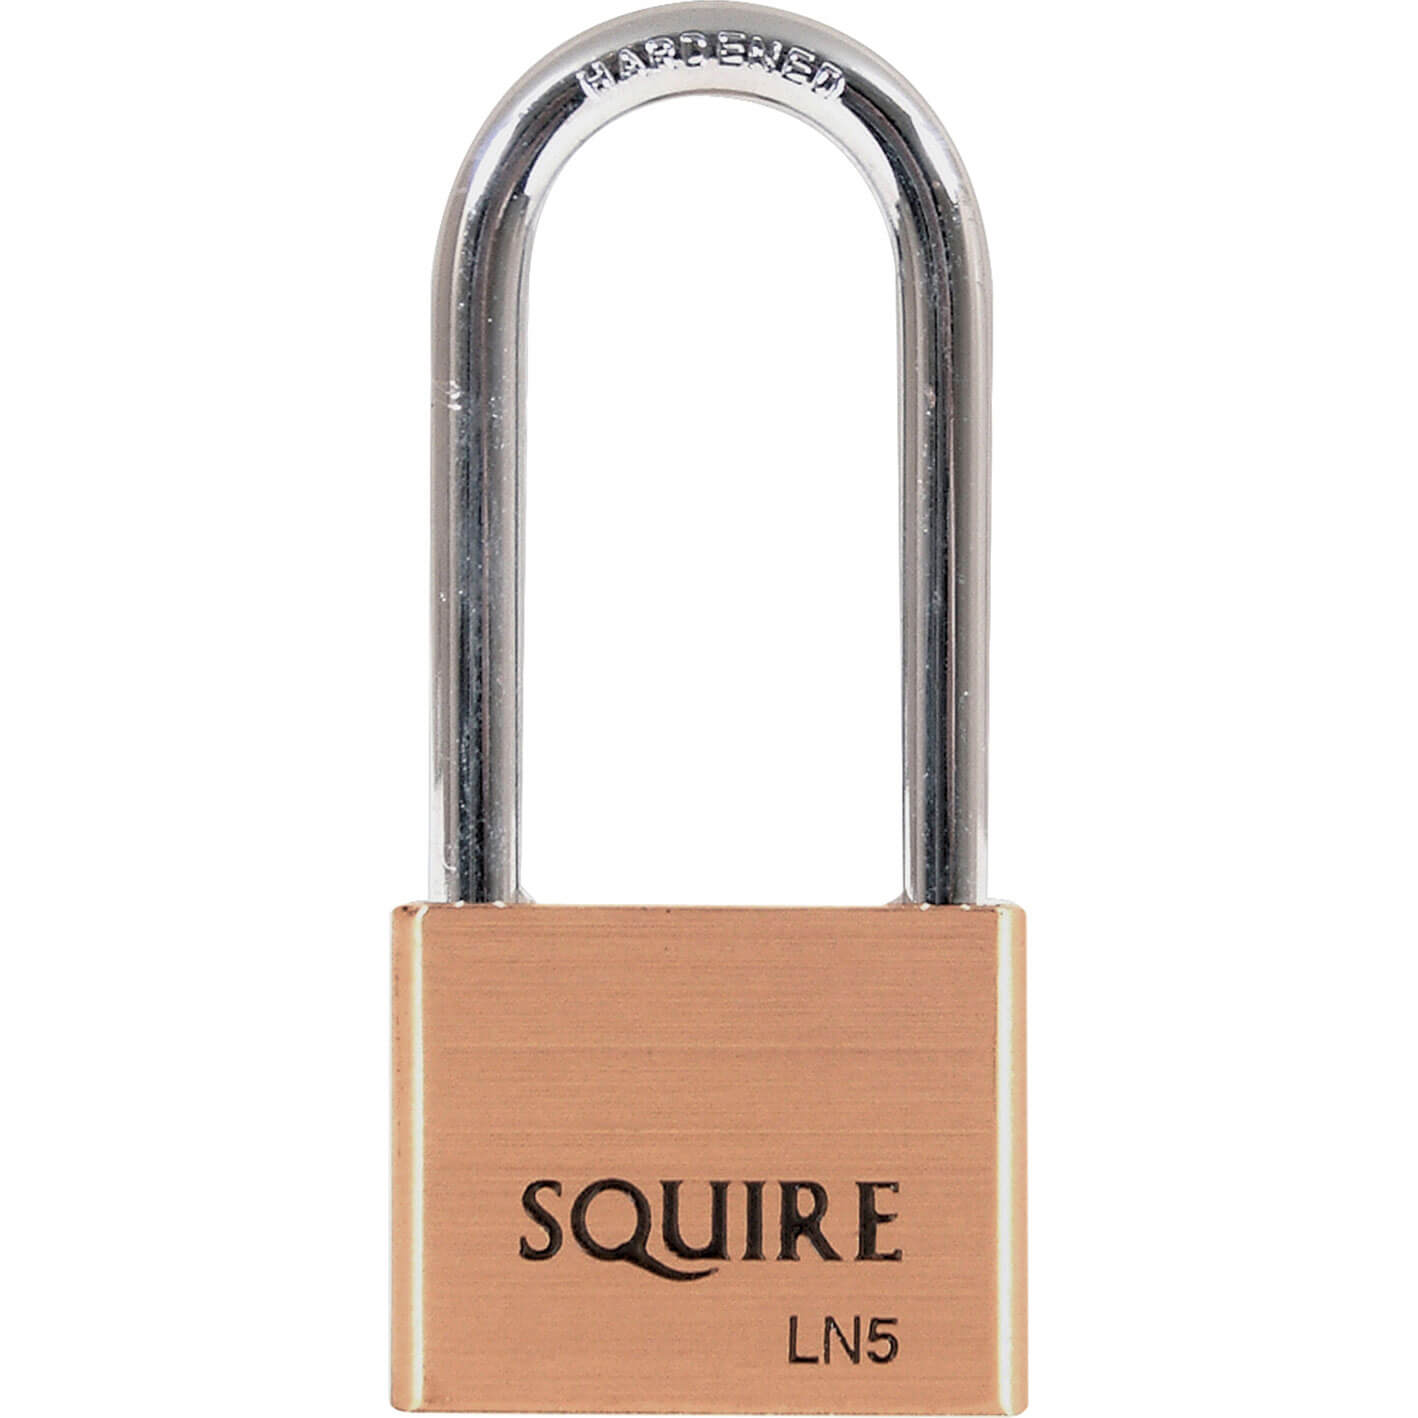 Image of Squire Lion Series Brass Padlock 50mm Long